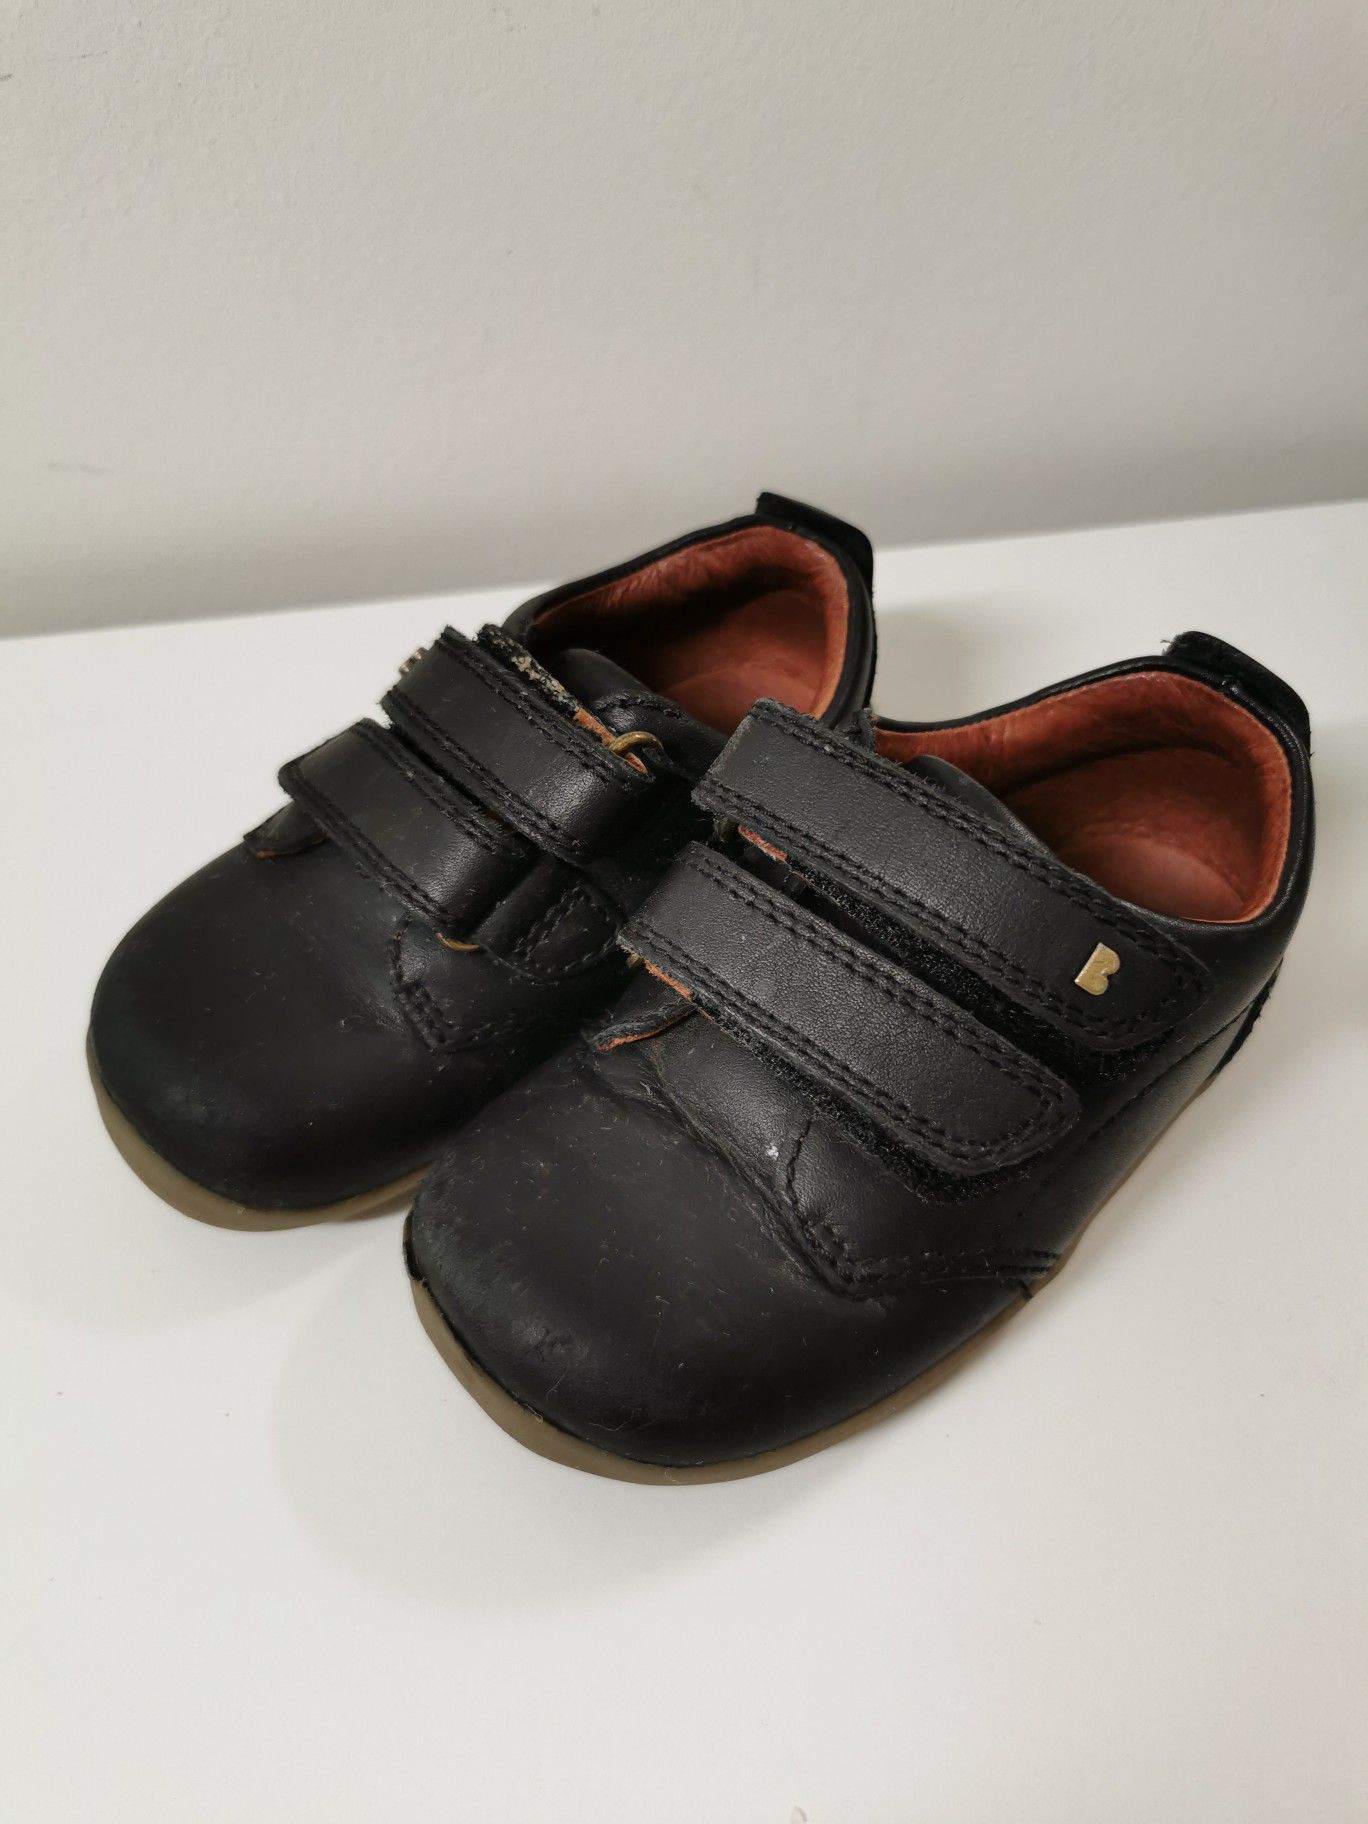 FREE families shoes